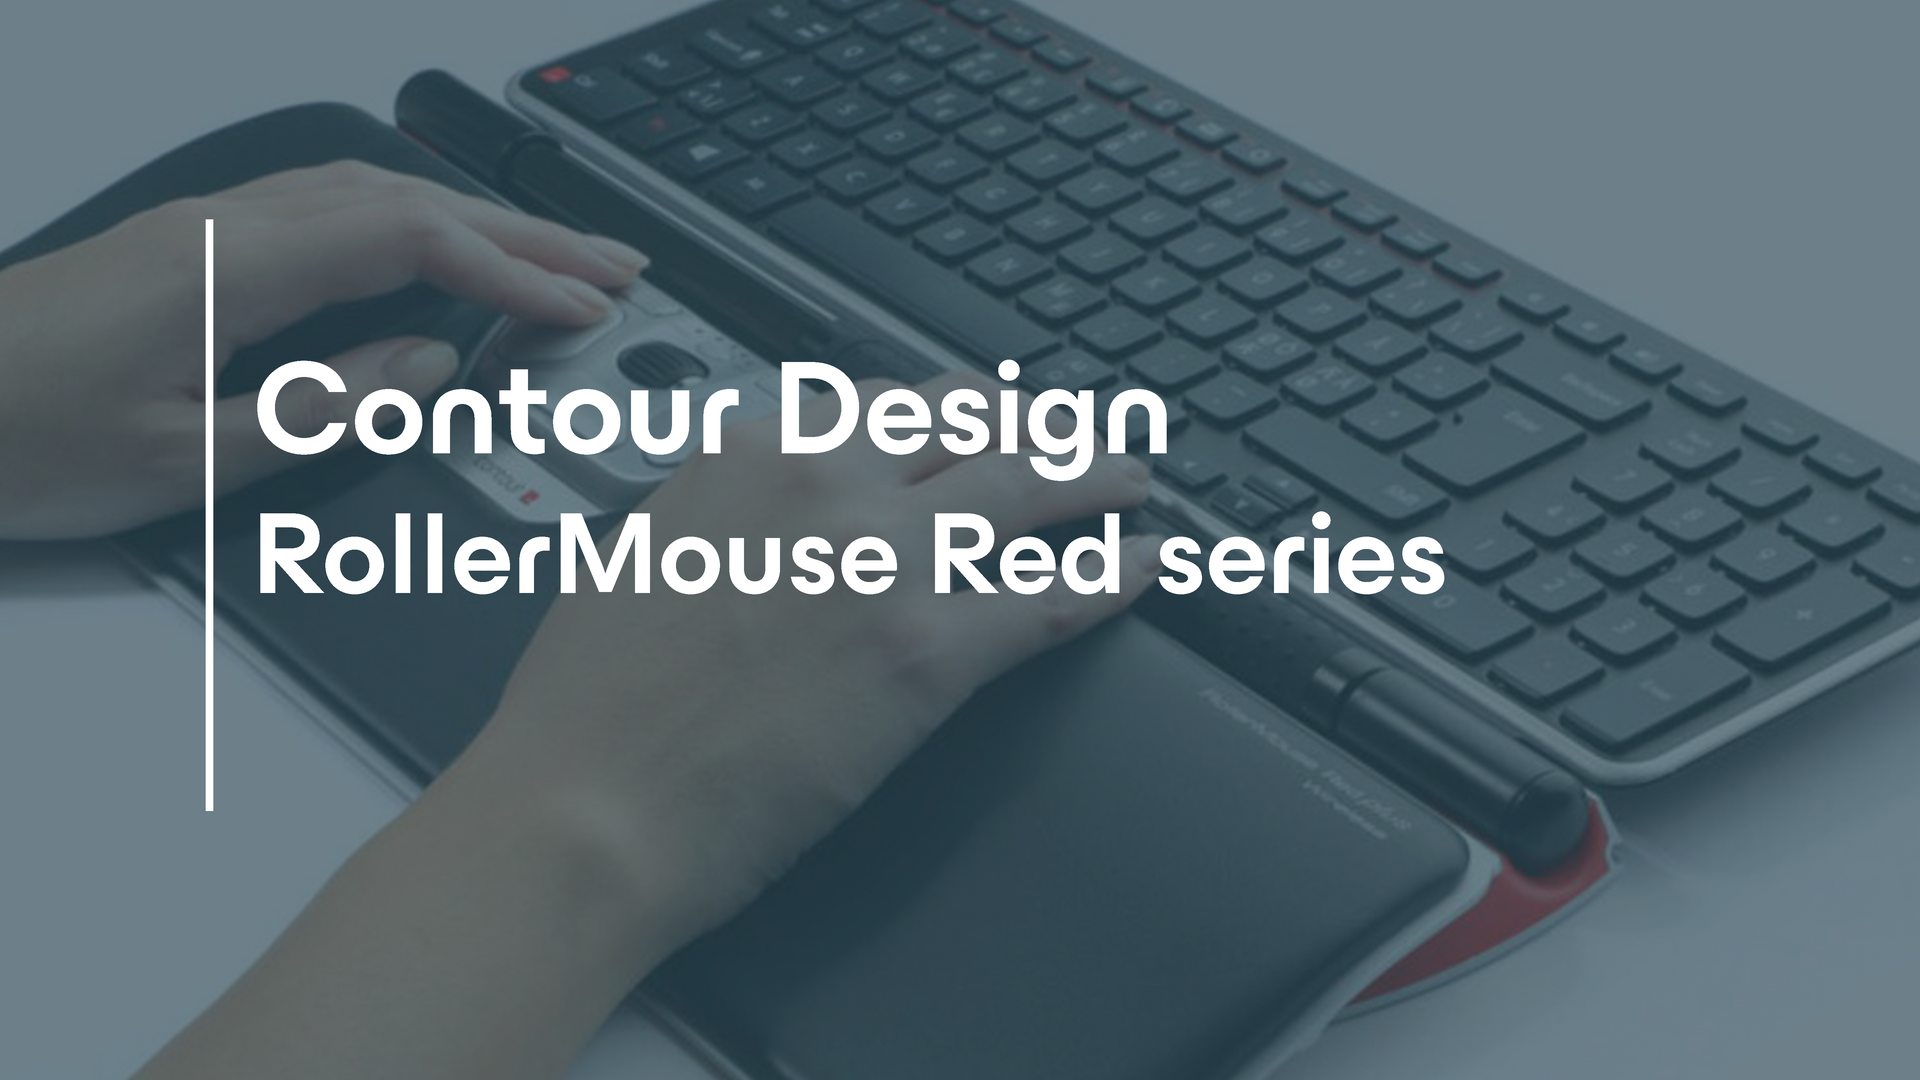 The RollerMouse Red Series Tile